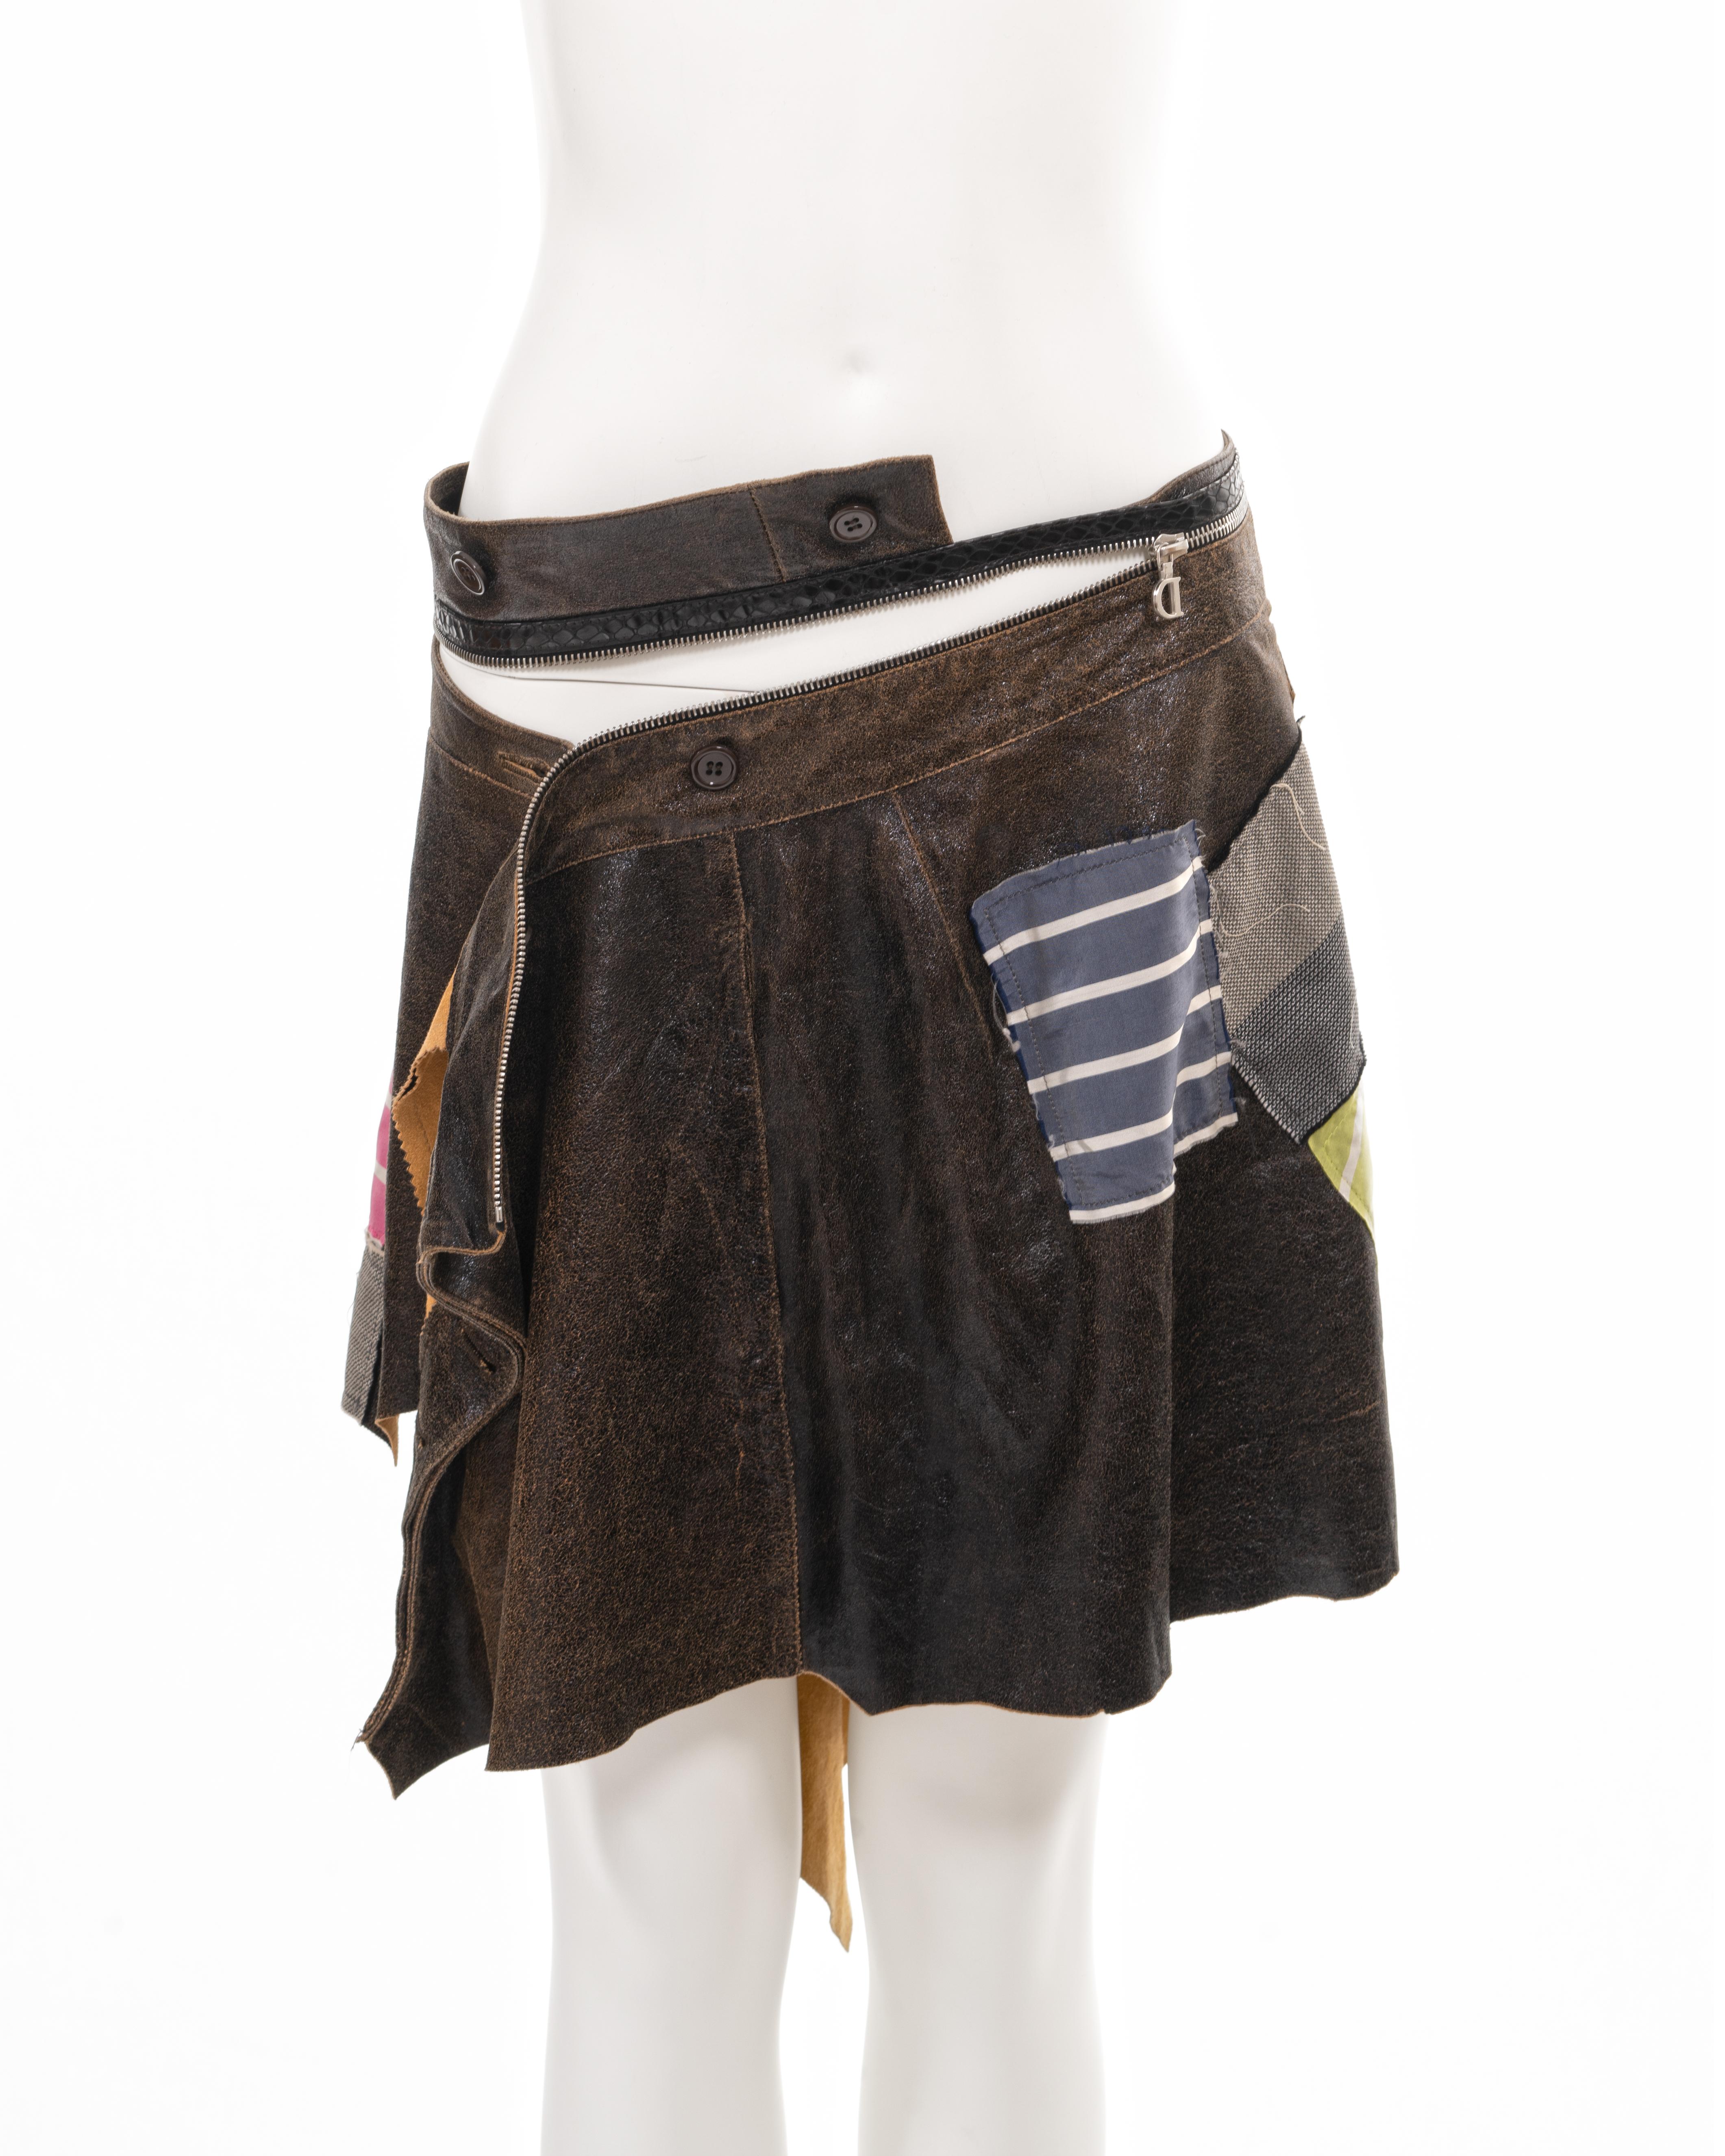 Christian Dior by John Galliano deconstructed brown leather wrap skirt, ss 2001 For Sale 2